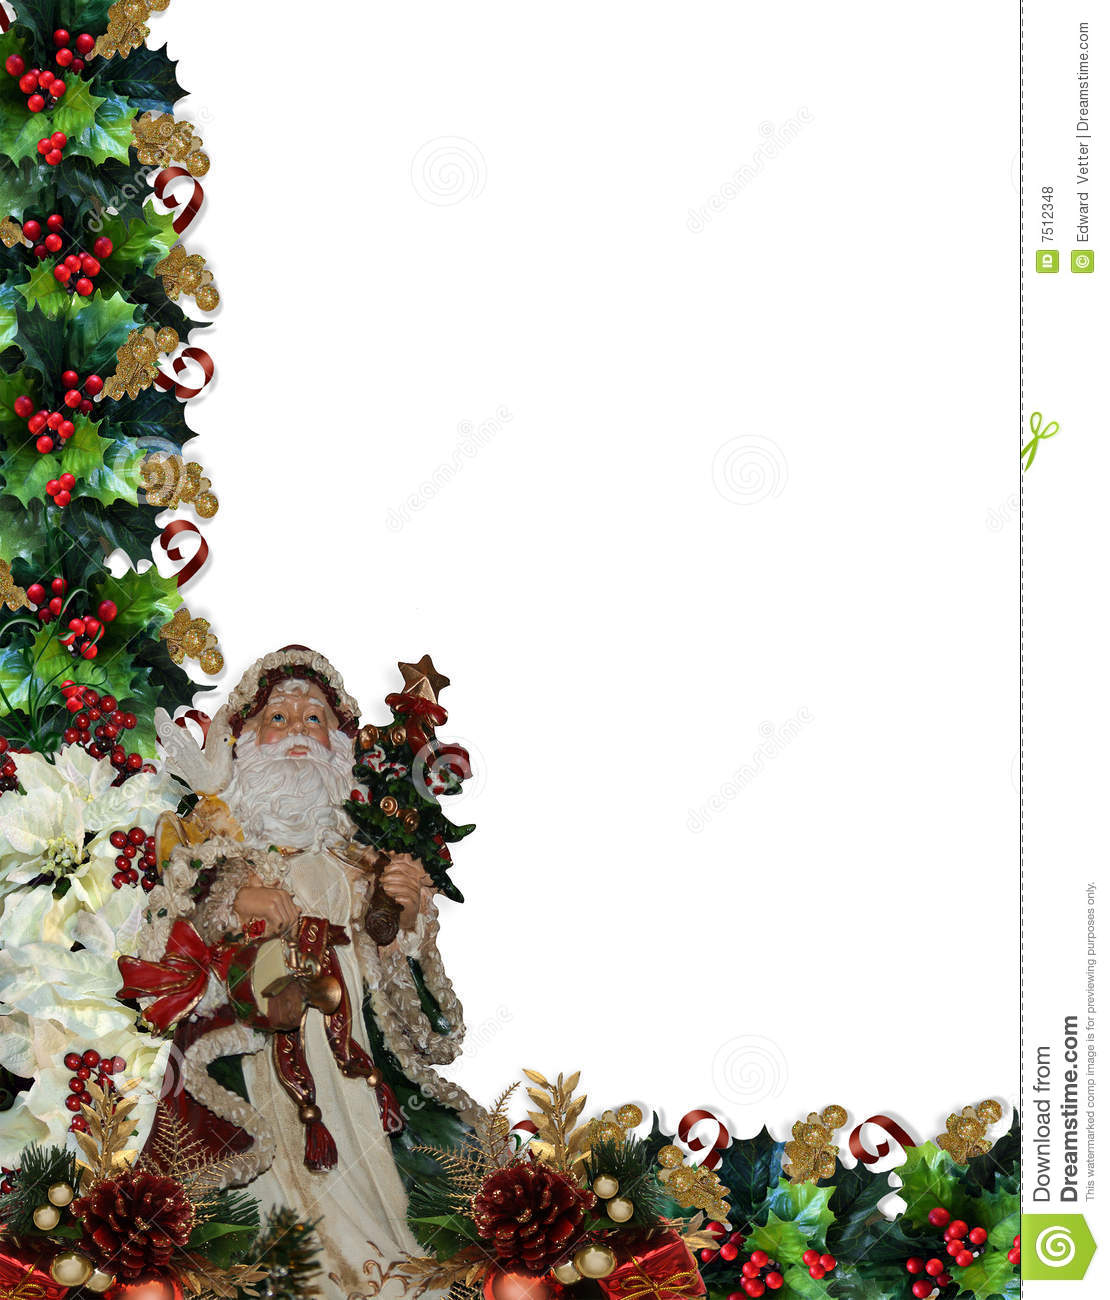 Background Border Or Frame With Copy Space And Victorian Santa